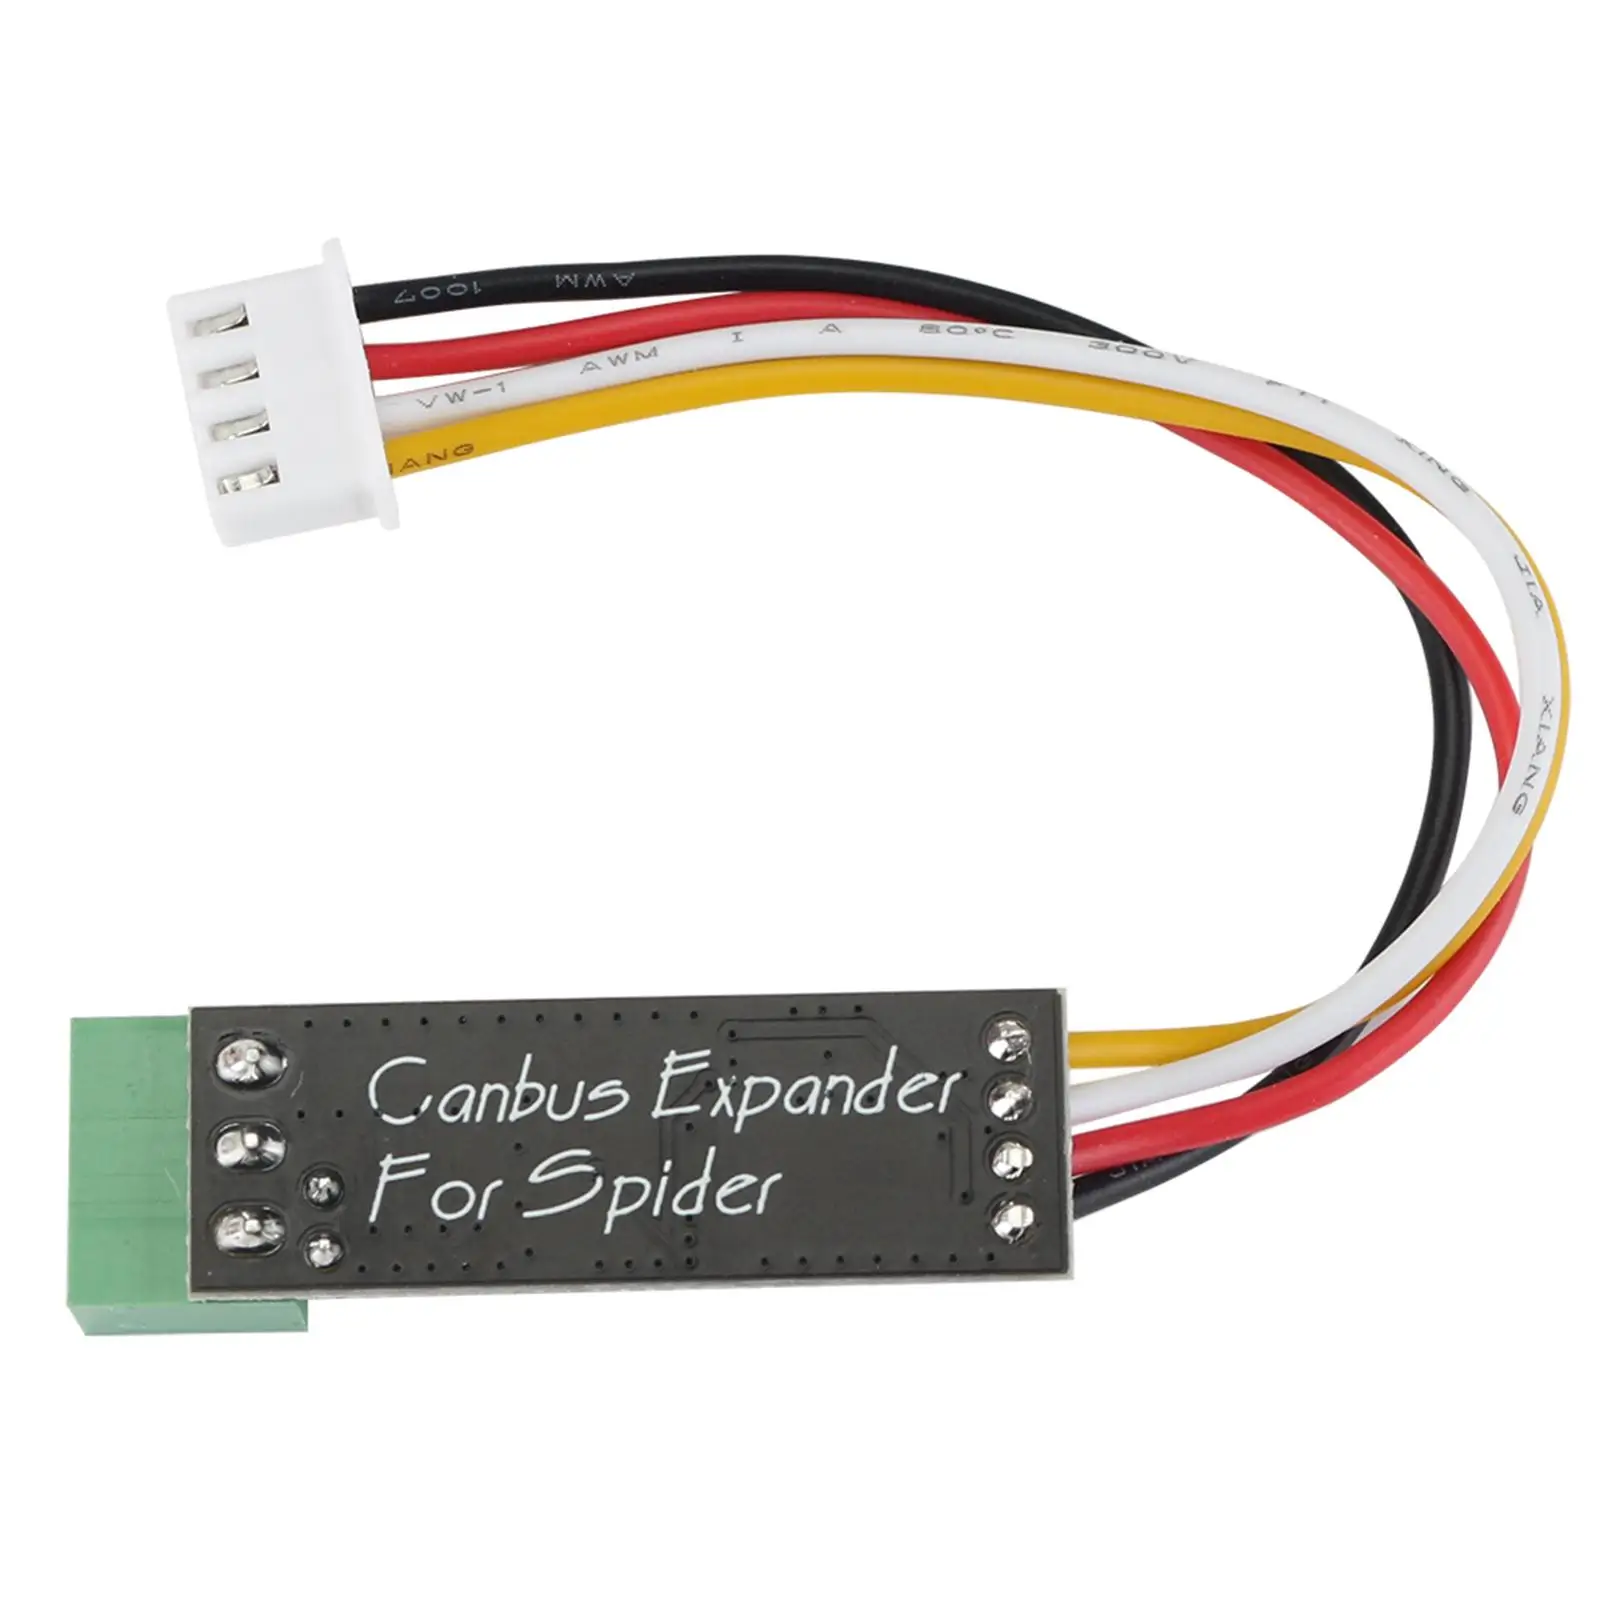 Canbus Expander Module Replaces Adapter Transceiver Accessories for Spider Board